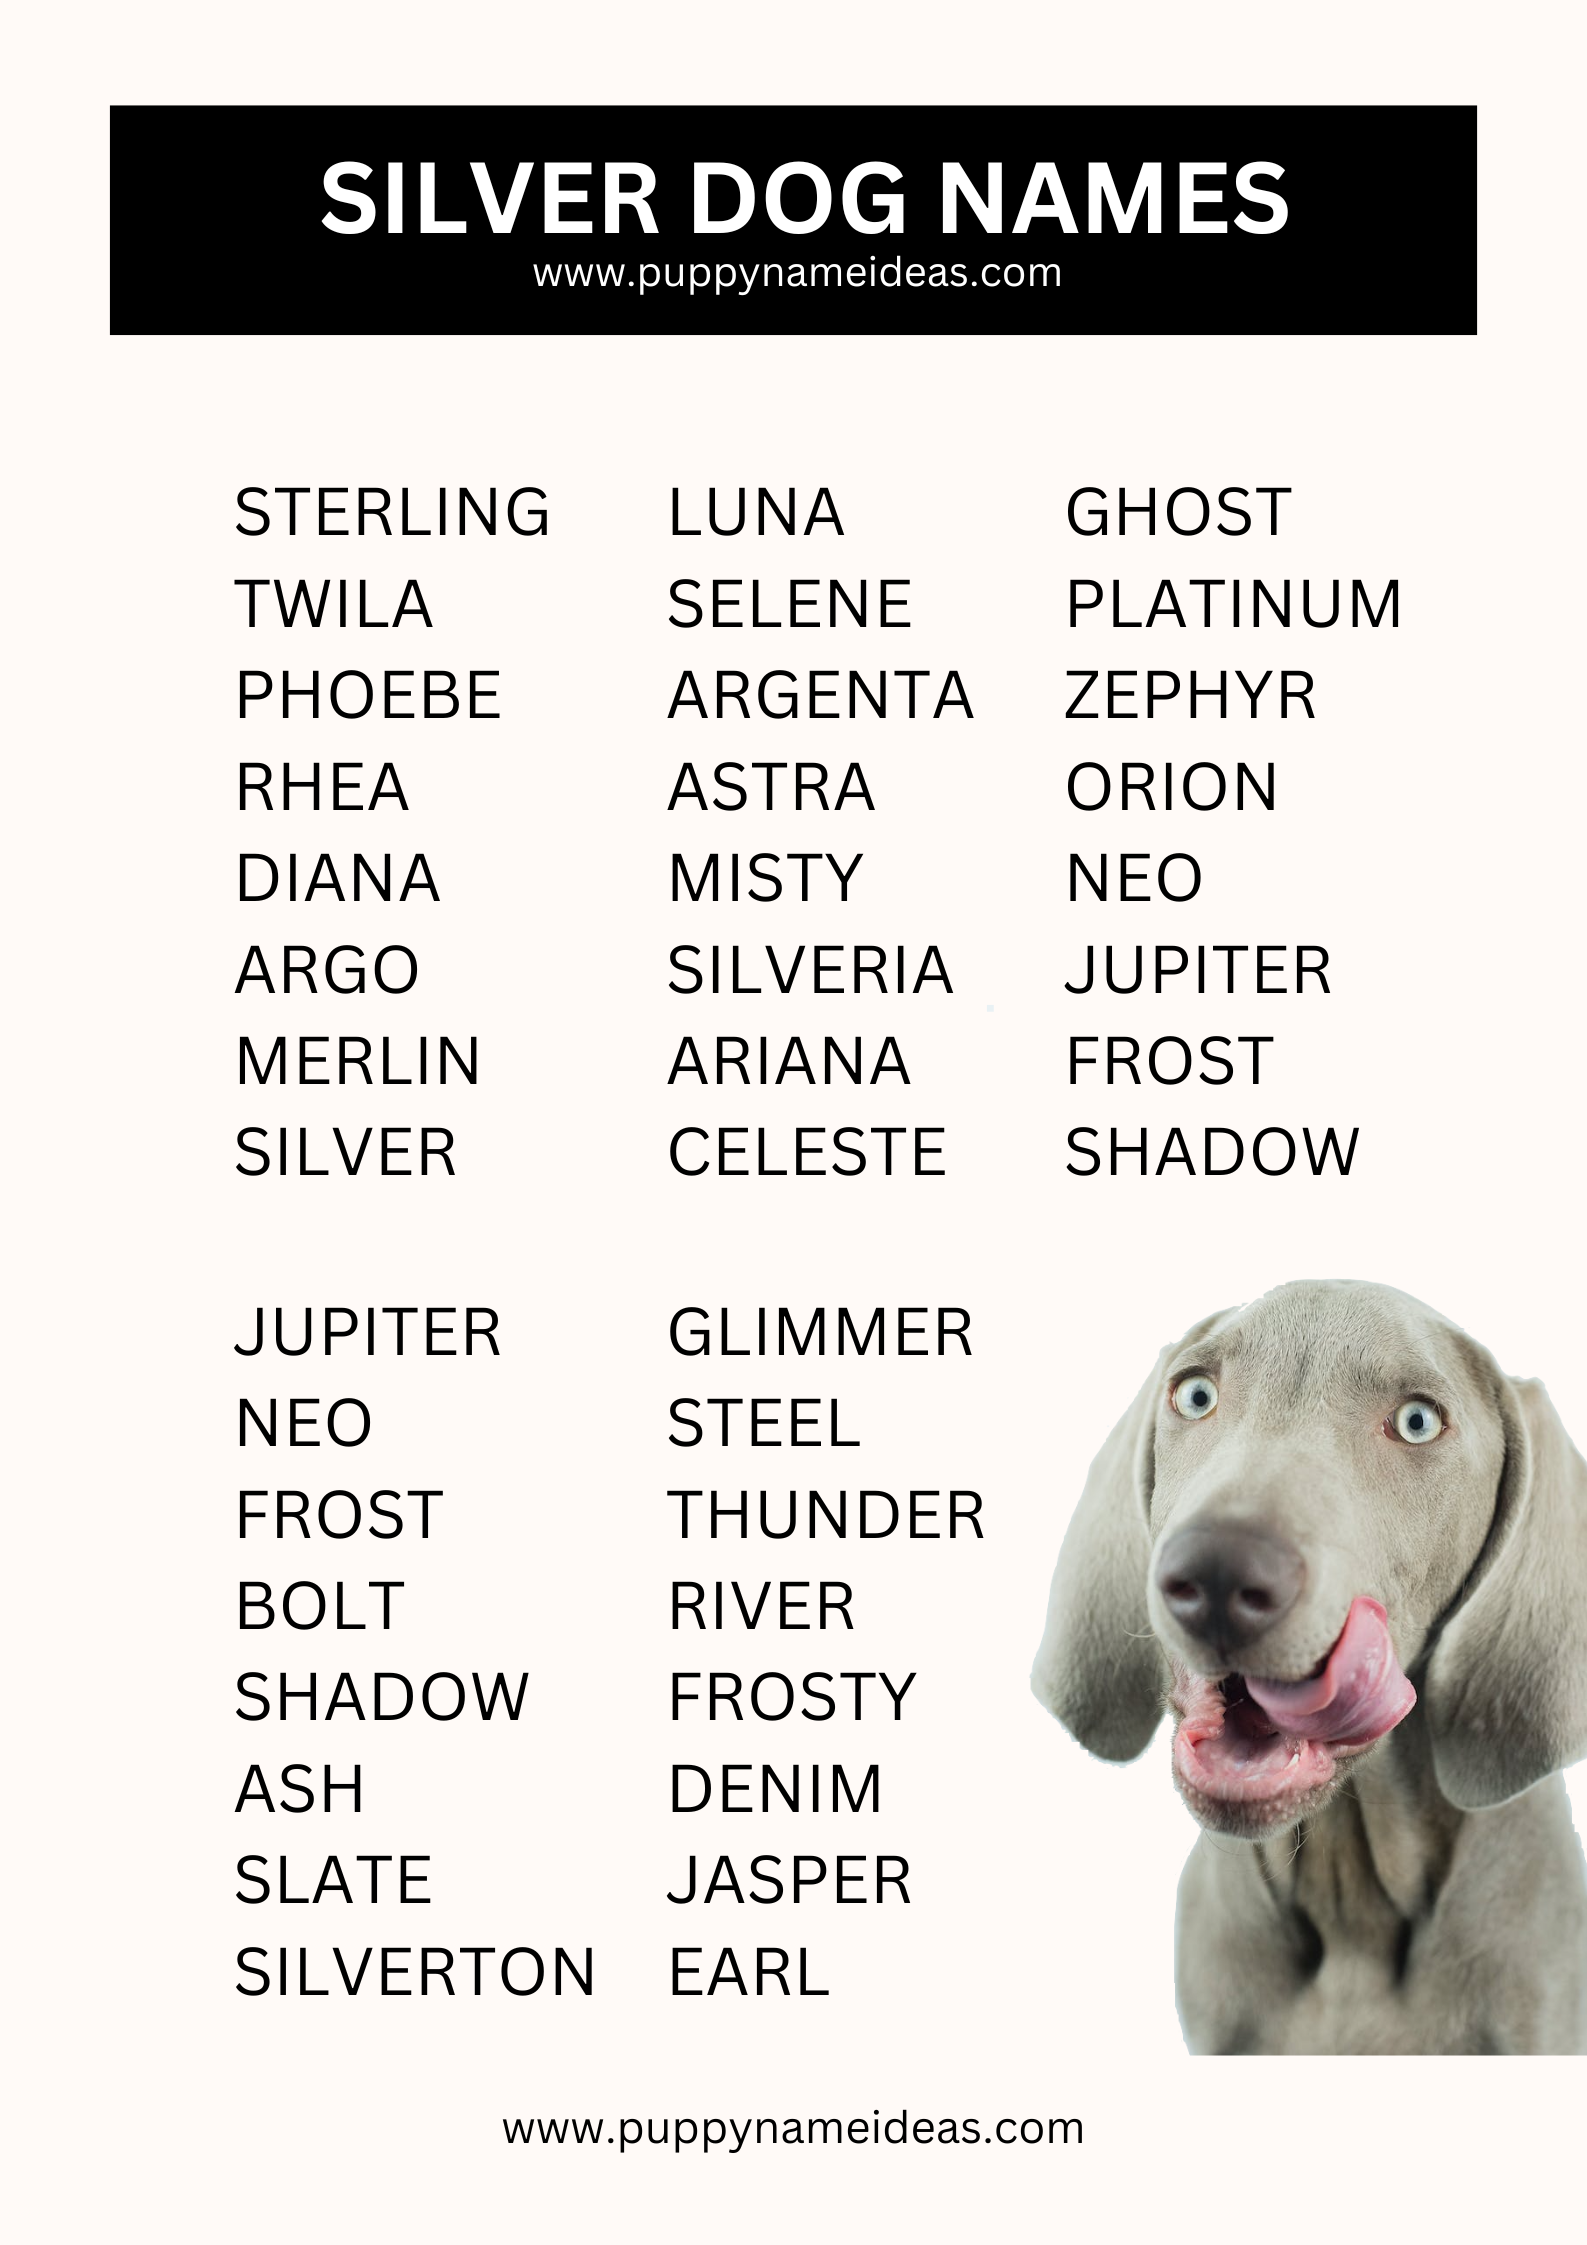 List Of Silver Dog Names